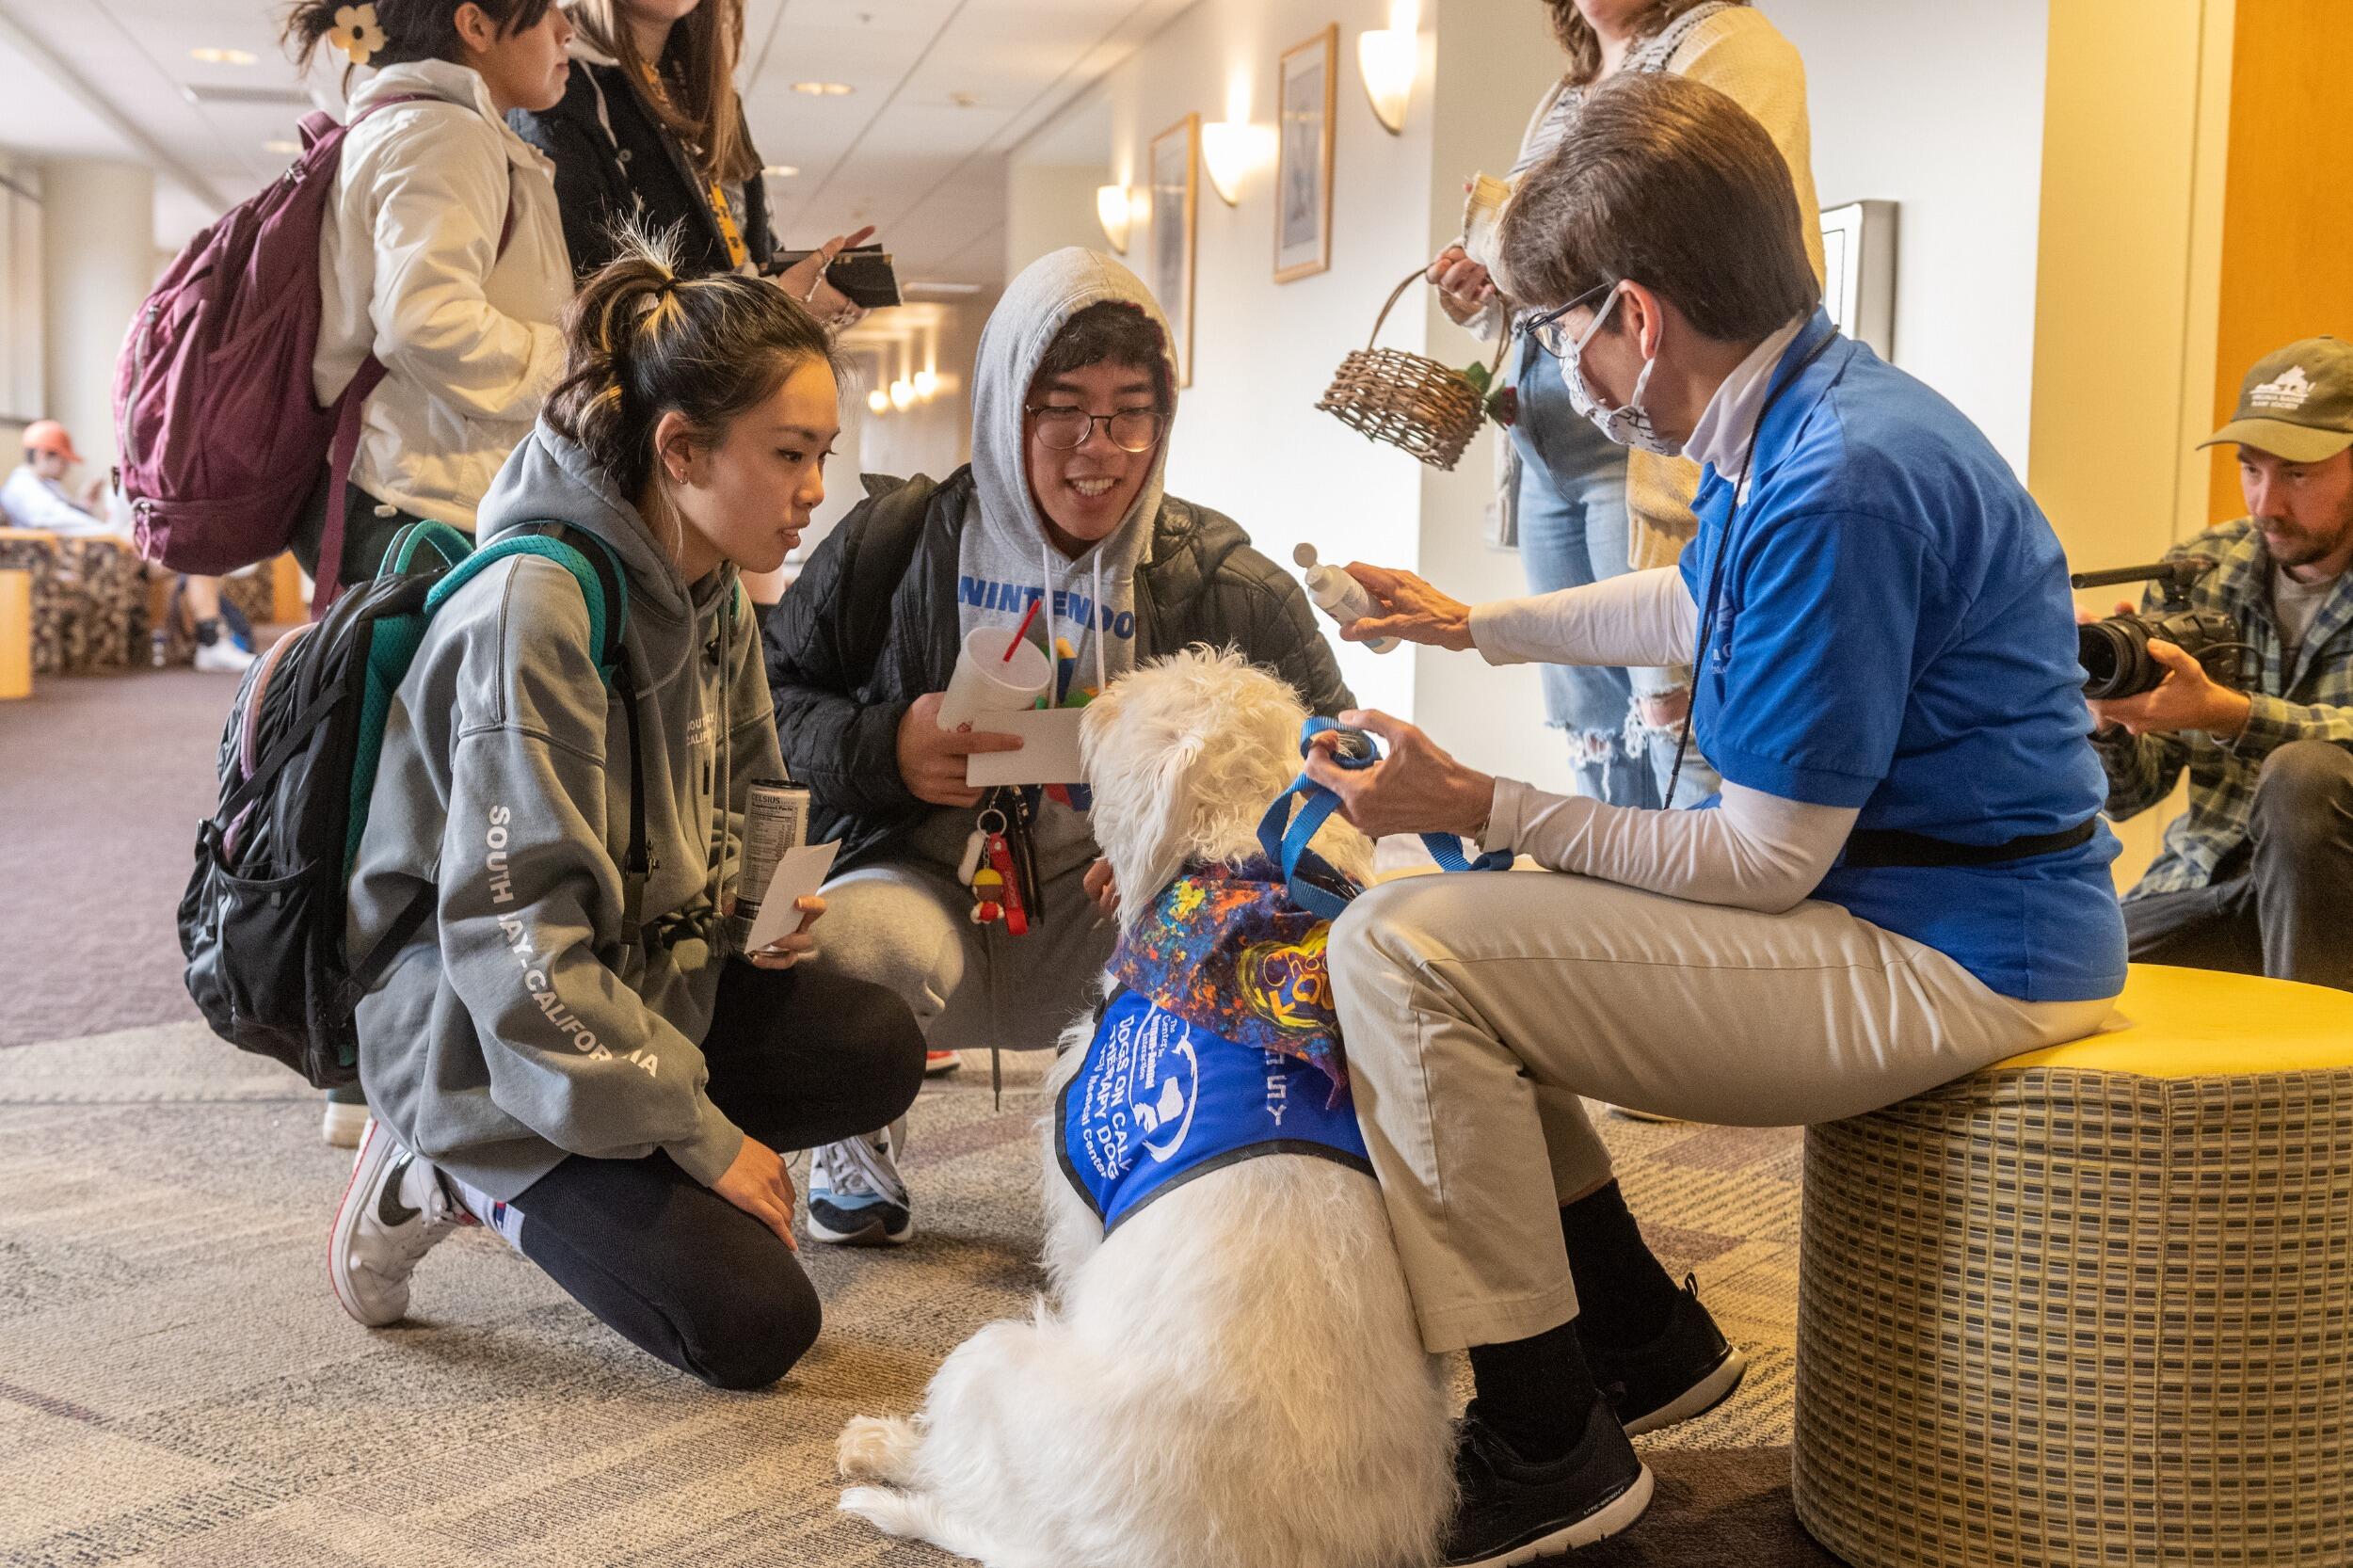 Students interacting with a therapy dog and its handler.